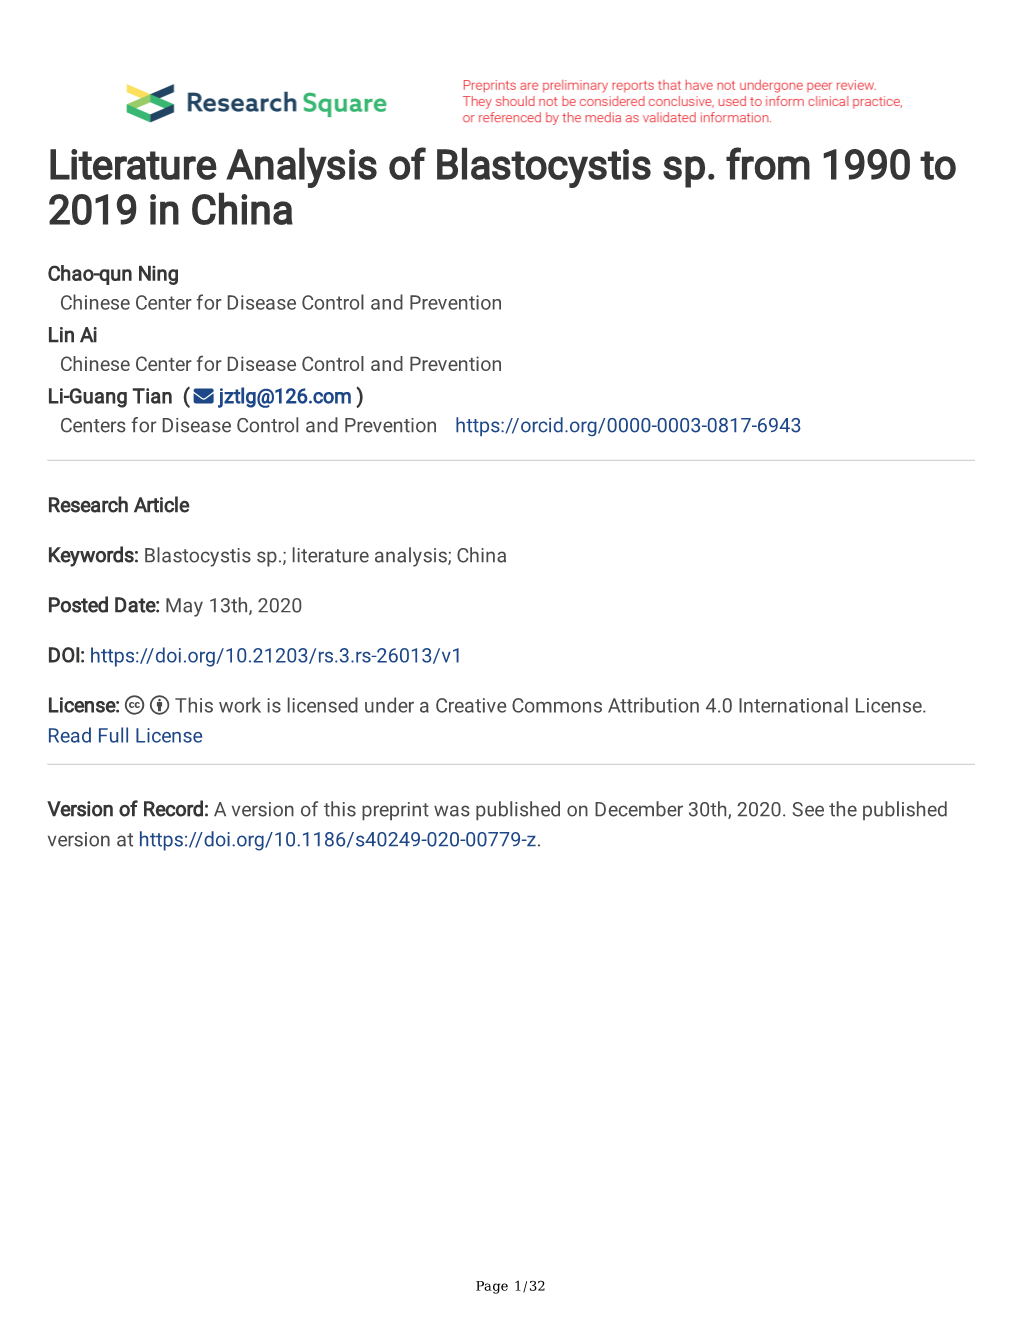 Literature Analysis of Blastocystis Sp. from 1990 to 2019 in China